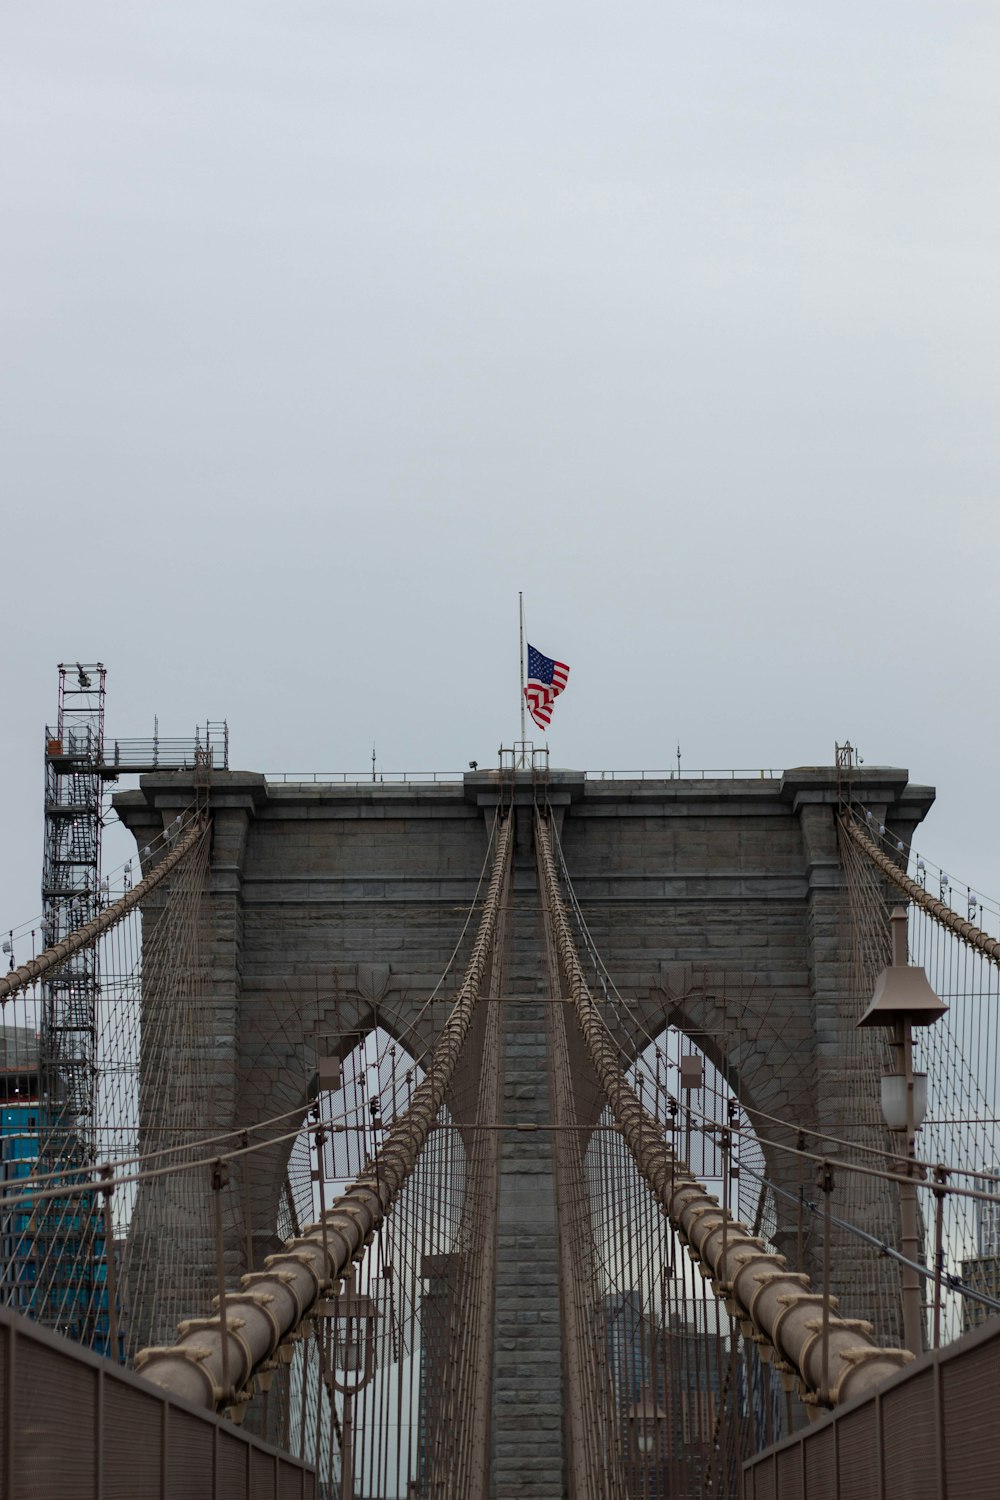 a view of a bridge with a flag on top of it